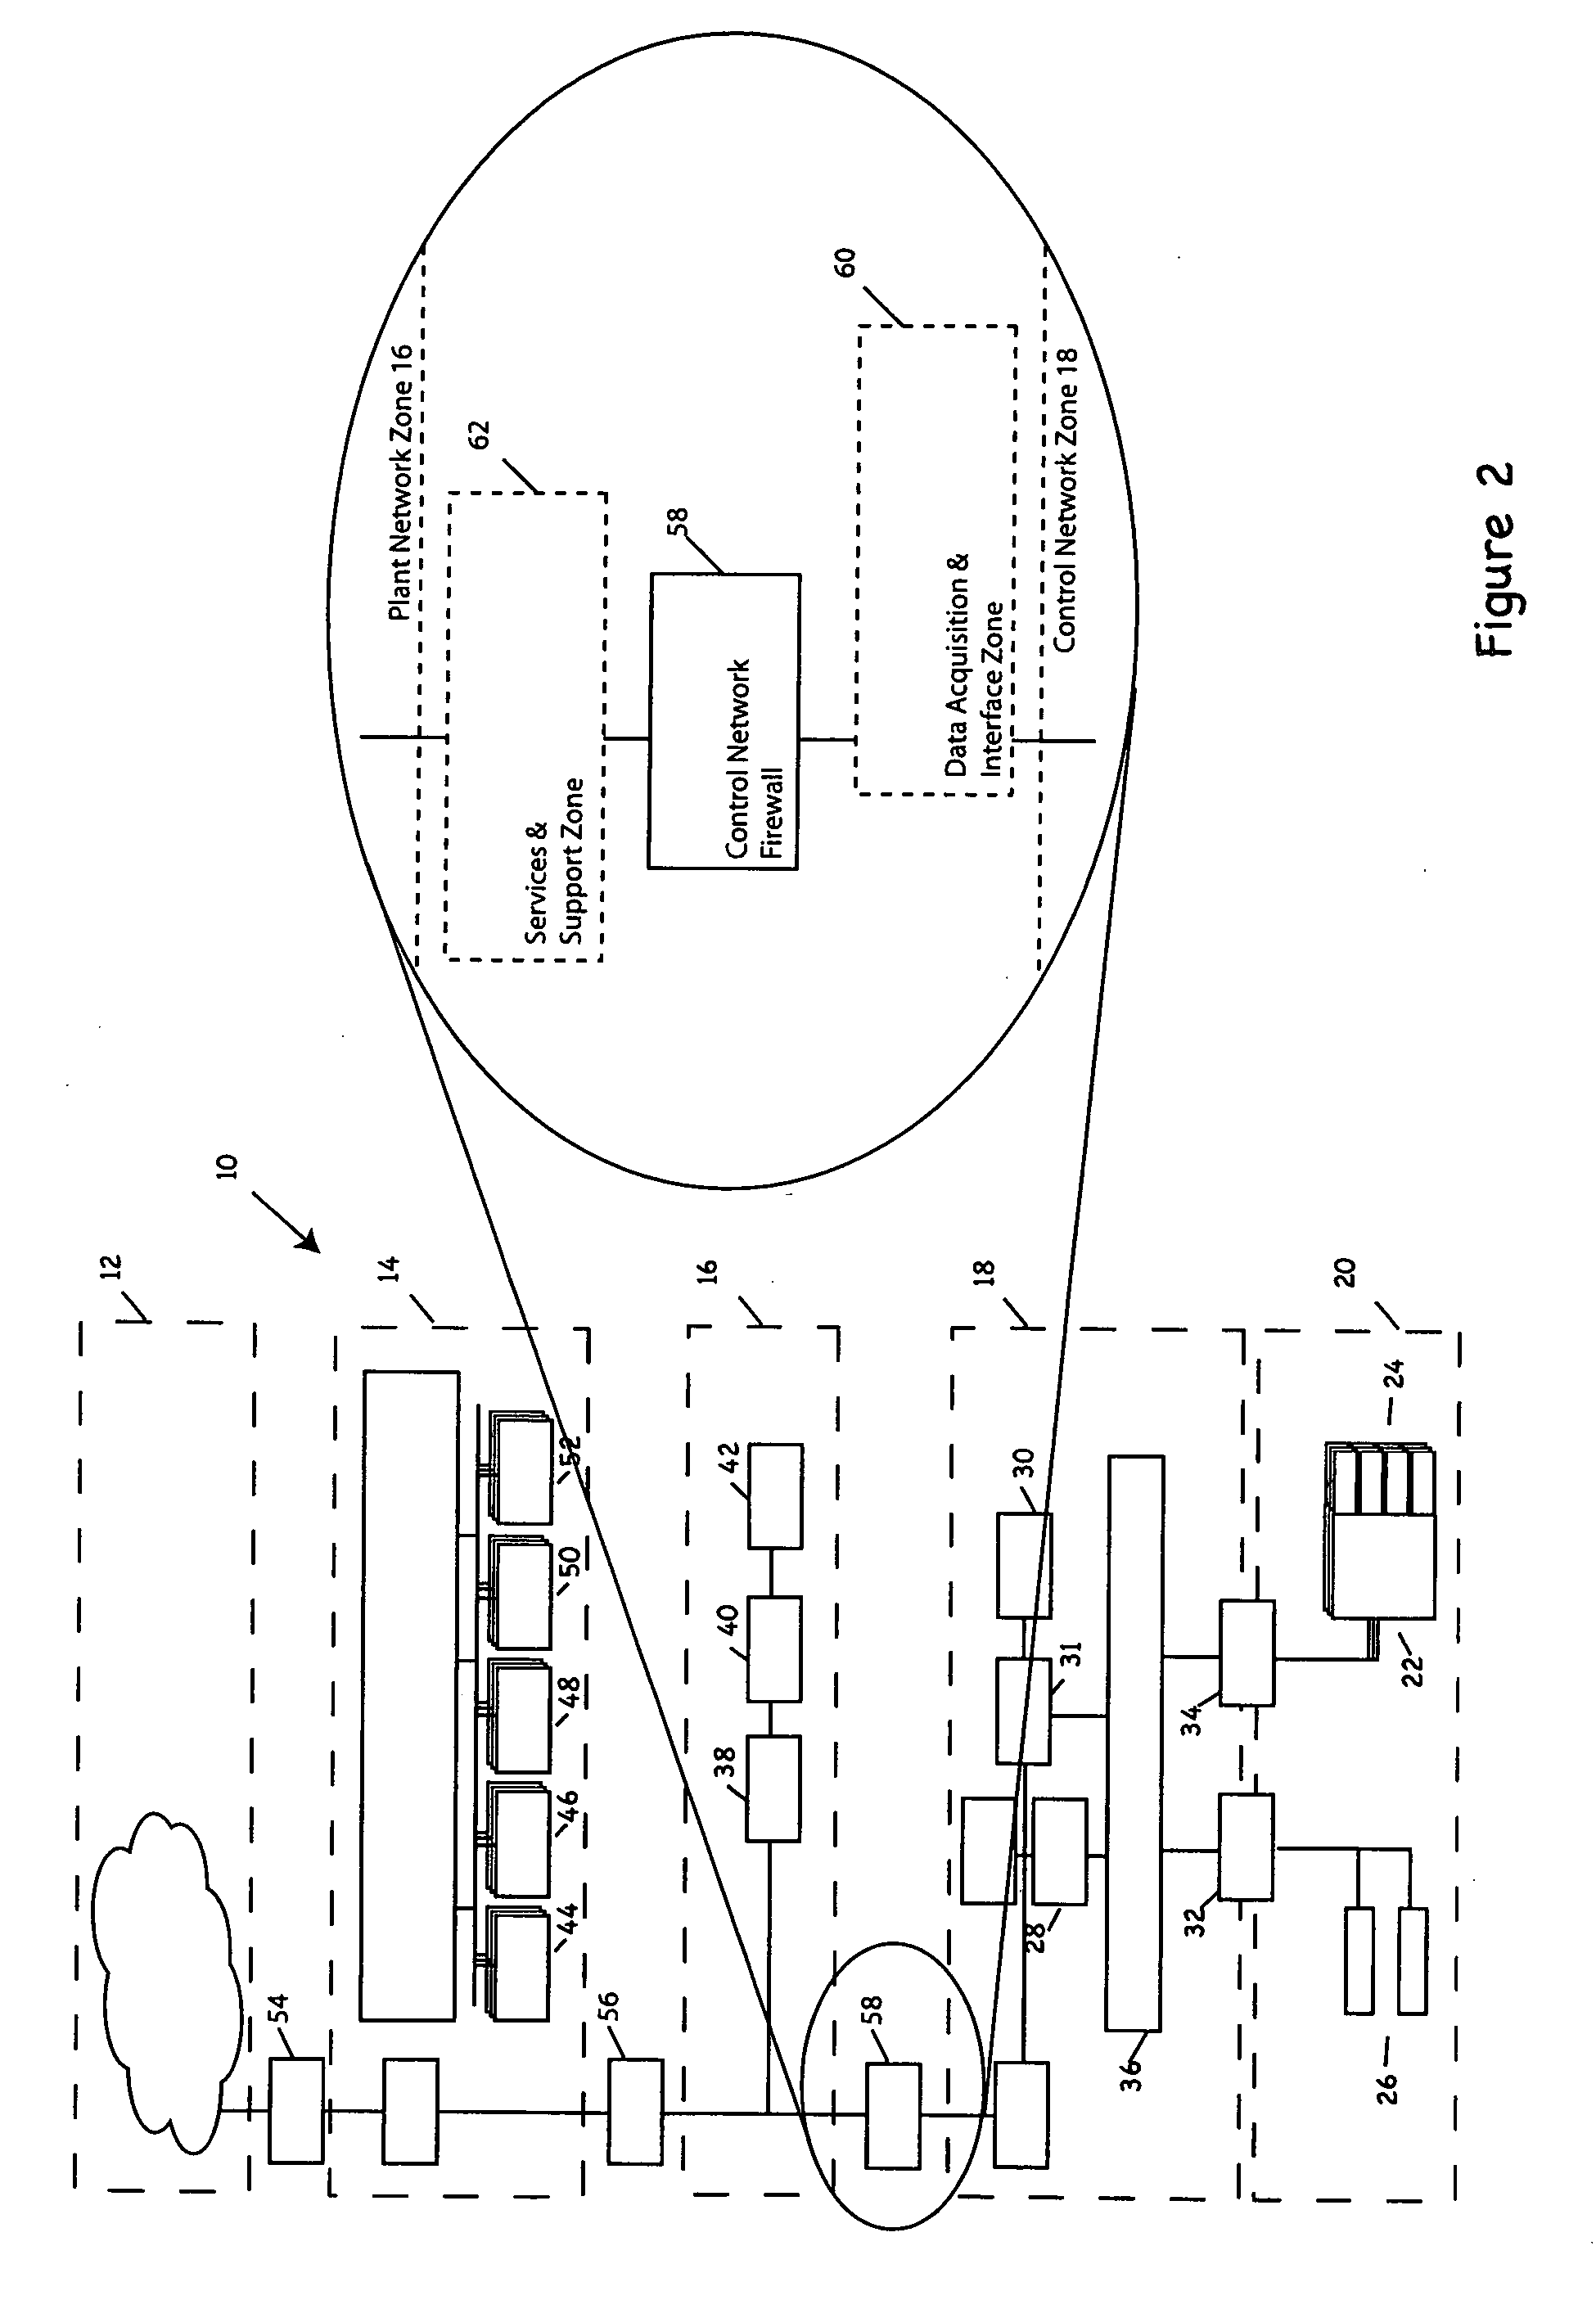 Process control methods and apparatus for intrusion detection, protection and network hardening